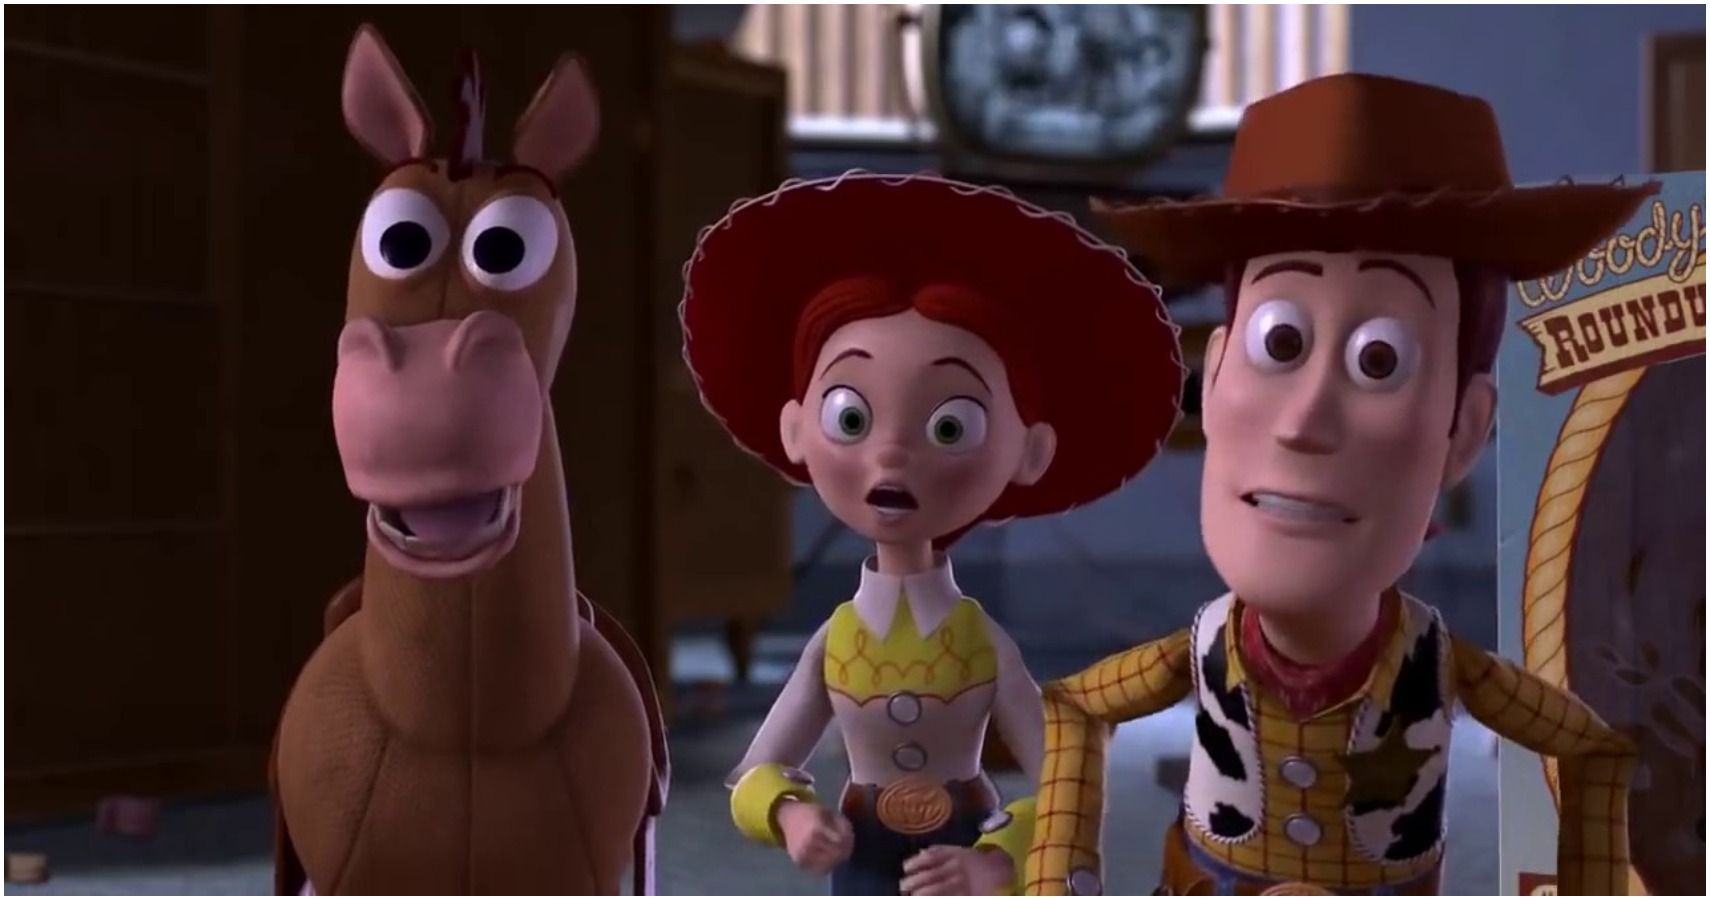 prospector reveals himself to woody and jessie